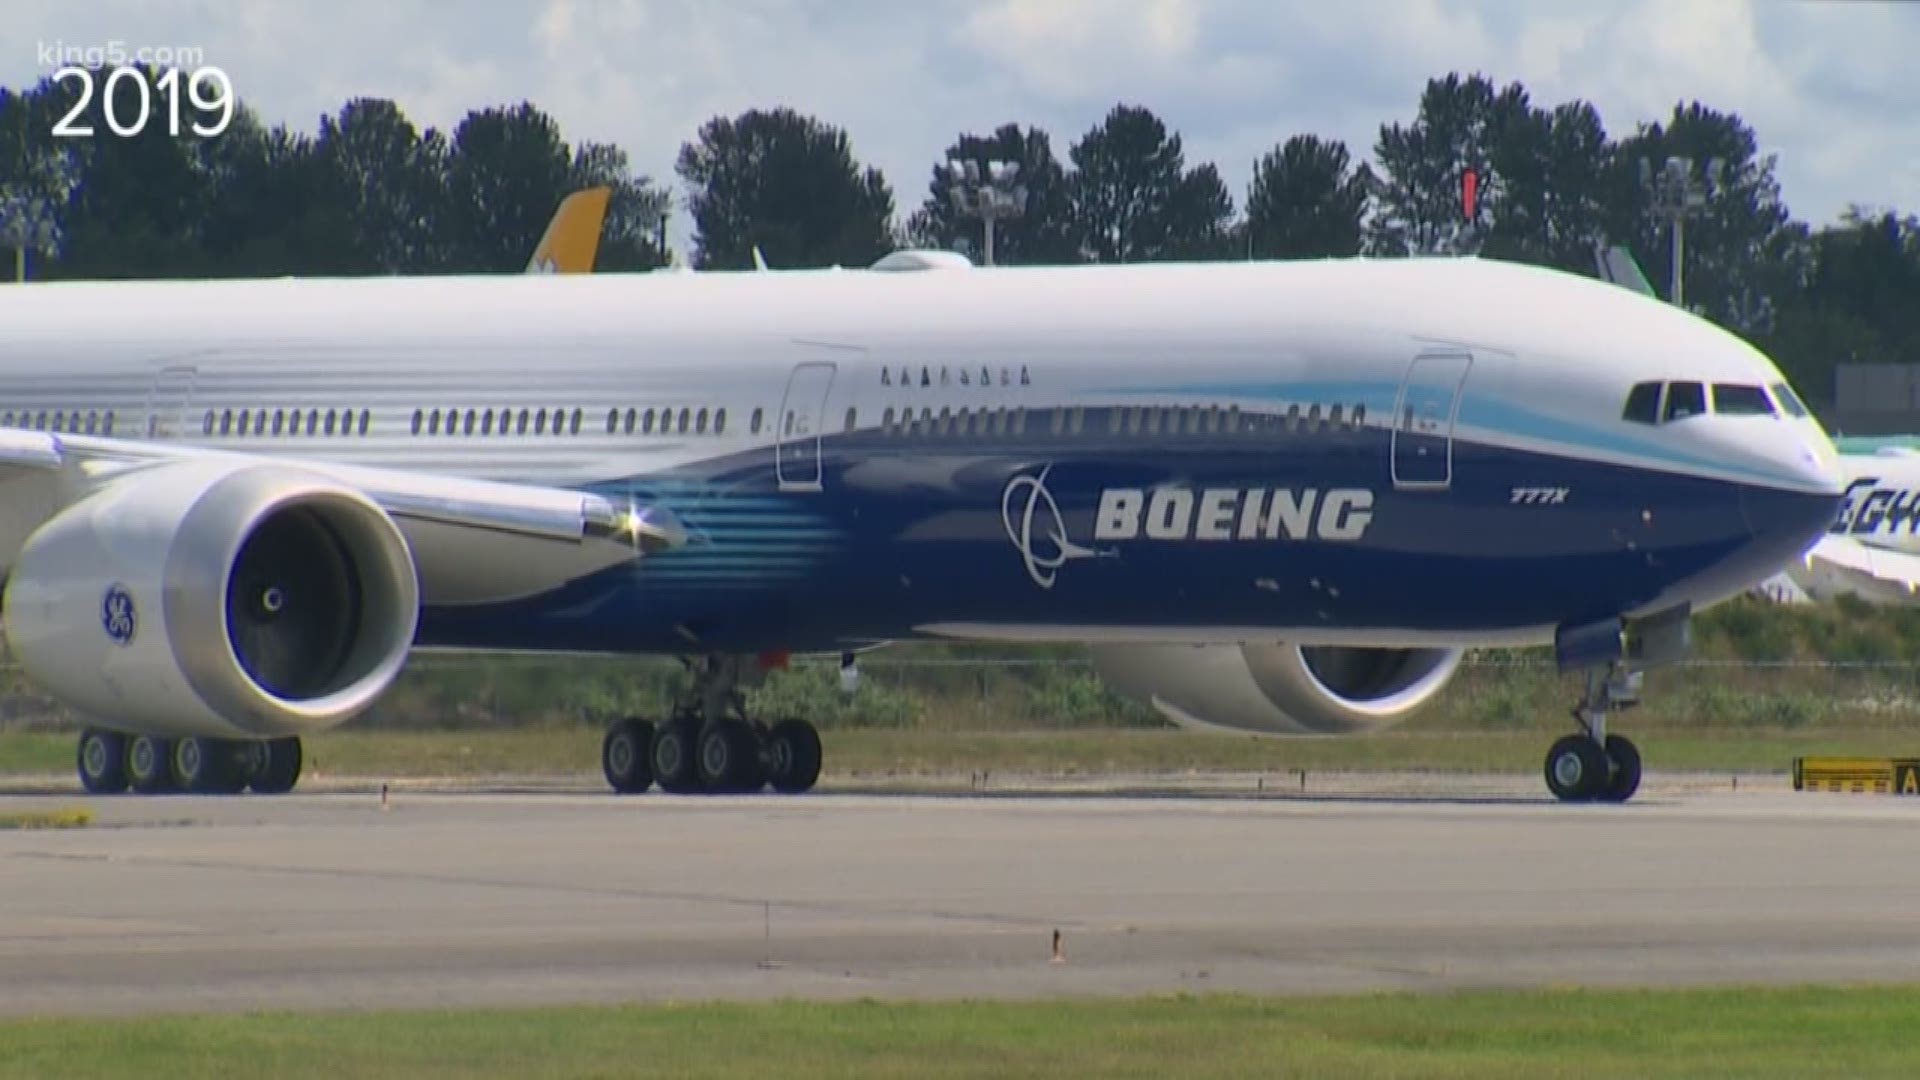 Boeing’s engine testing extended past midnight, and King County’s airport got noise complaints from neighbors.